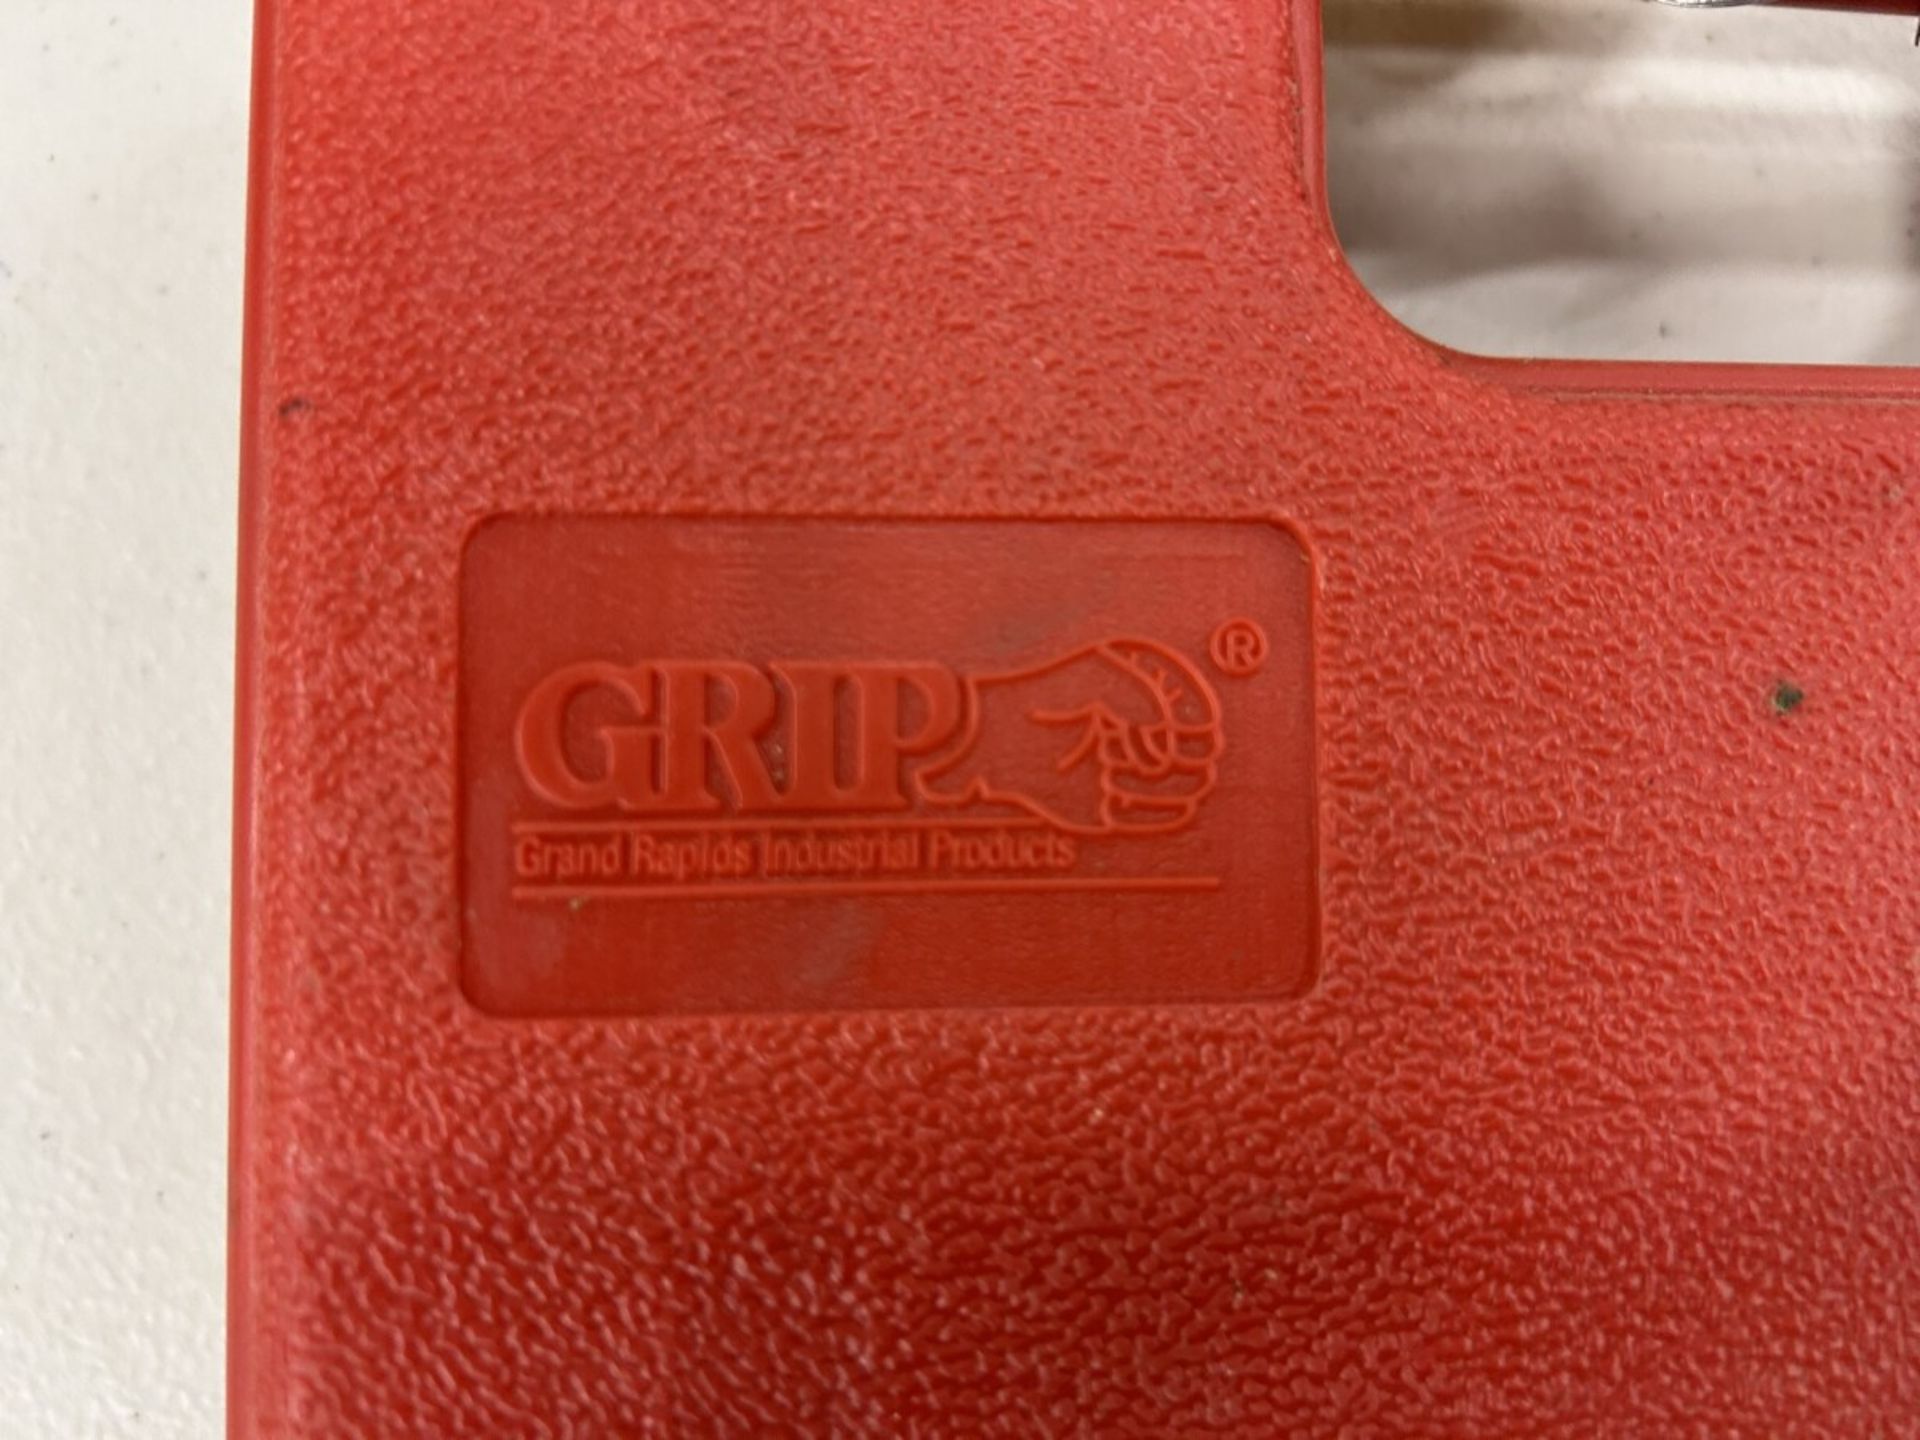 GRIP 1/2 DRIVE IMPACT SOCKETS SZ 1-3/16,1-5/16,1-3/8,1-7/16, AND 1-1/2 - Image 3 of 4